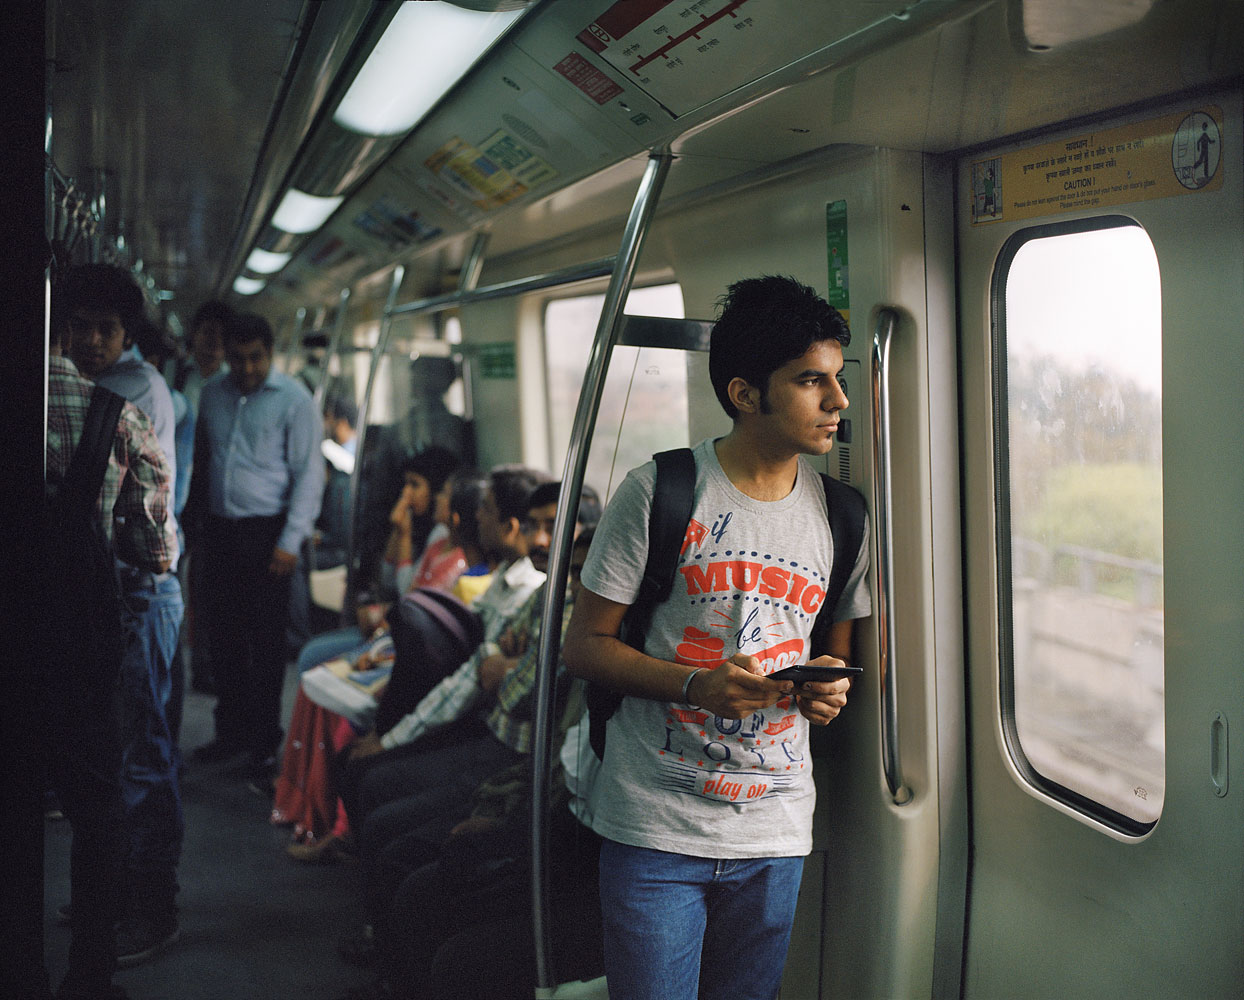 Mayank Jain, 20, Business student
                              Jain is a typical young man who carries his Kindle on his Delhi Metro ride to college. Mayank works as a trainee editor at Youth Ki Awaaz (Voice of the Youth), an online platform for young people, trying to raise awareness among India’s youth to make informed choices while voting.